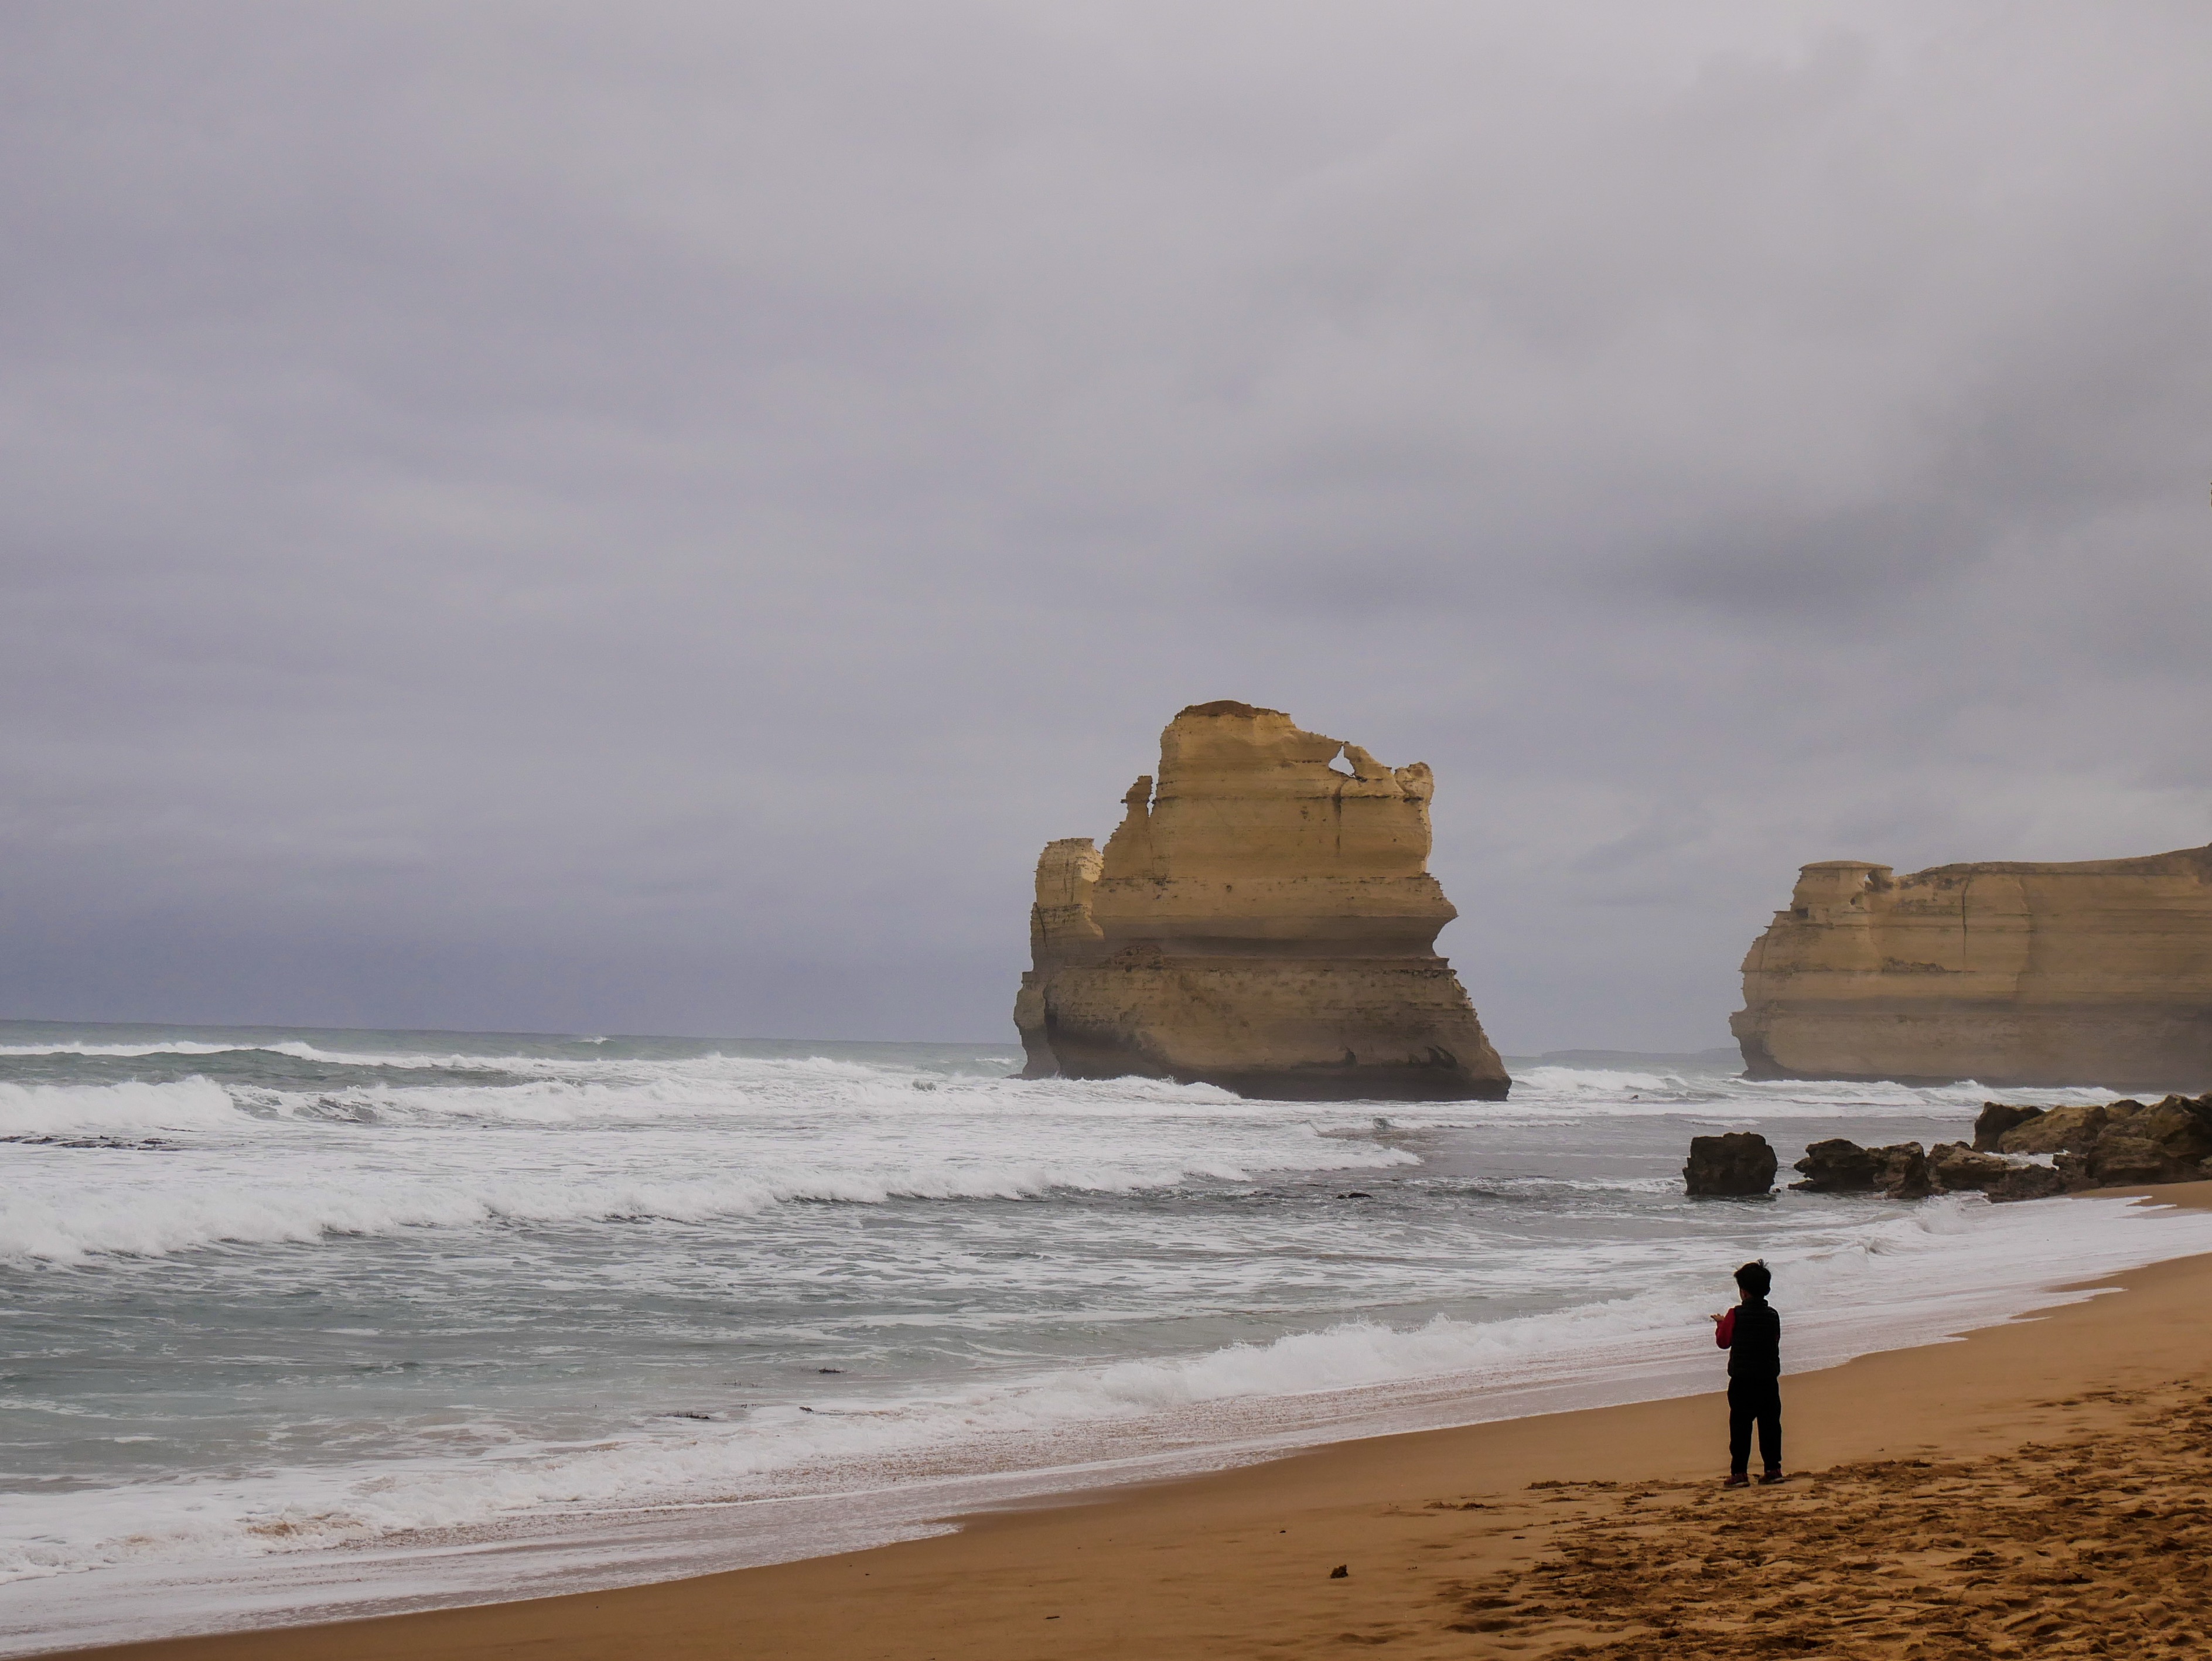 A Day Trip to the Great Ocean Road from Melbourne